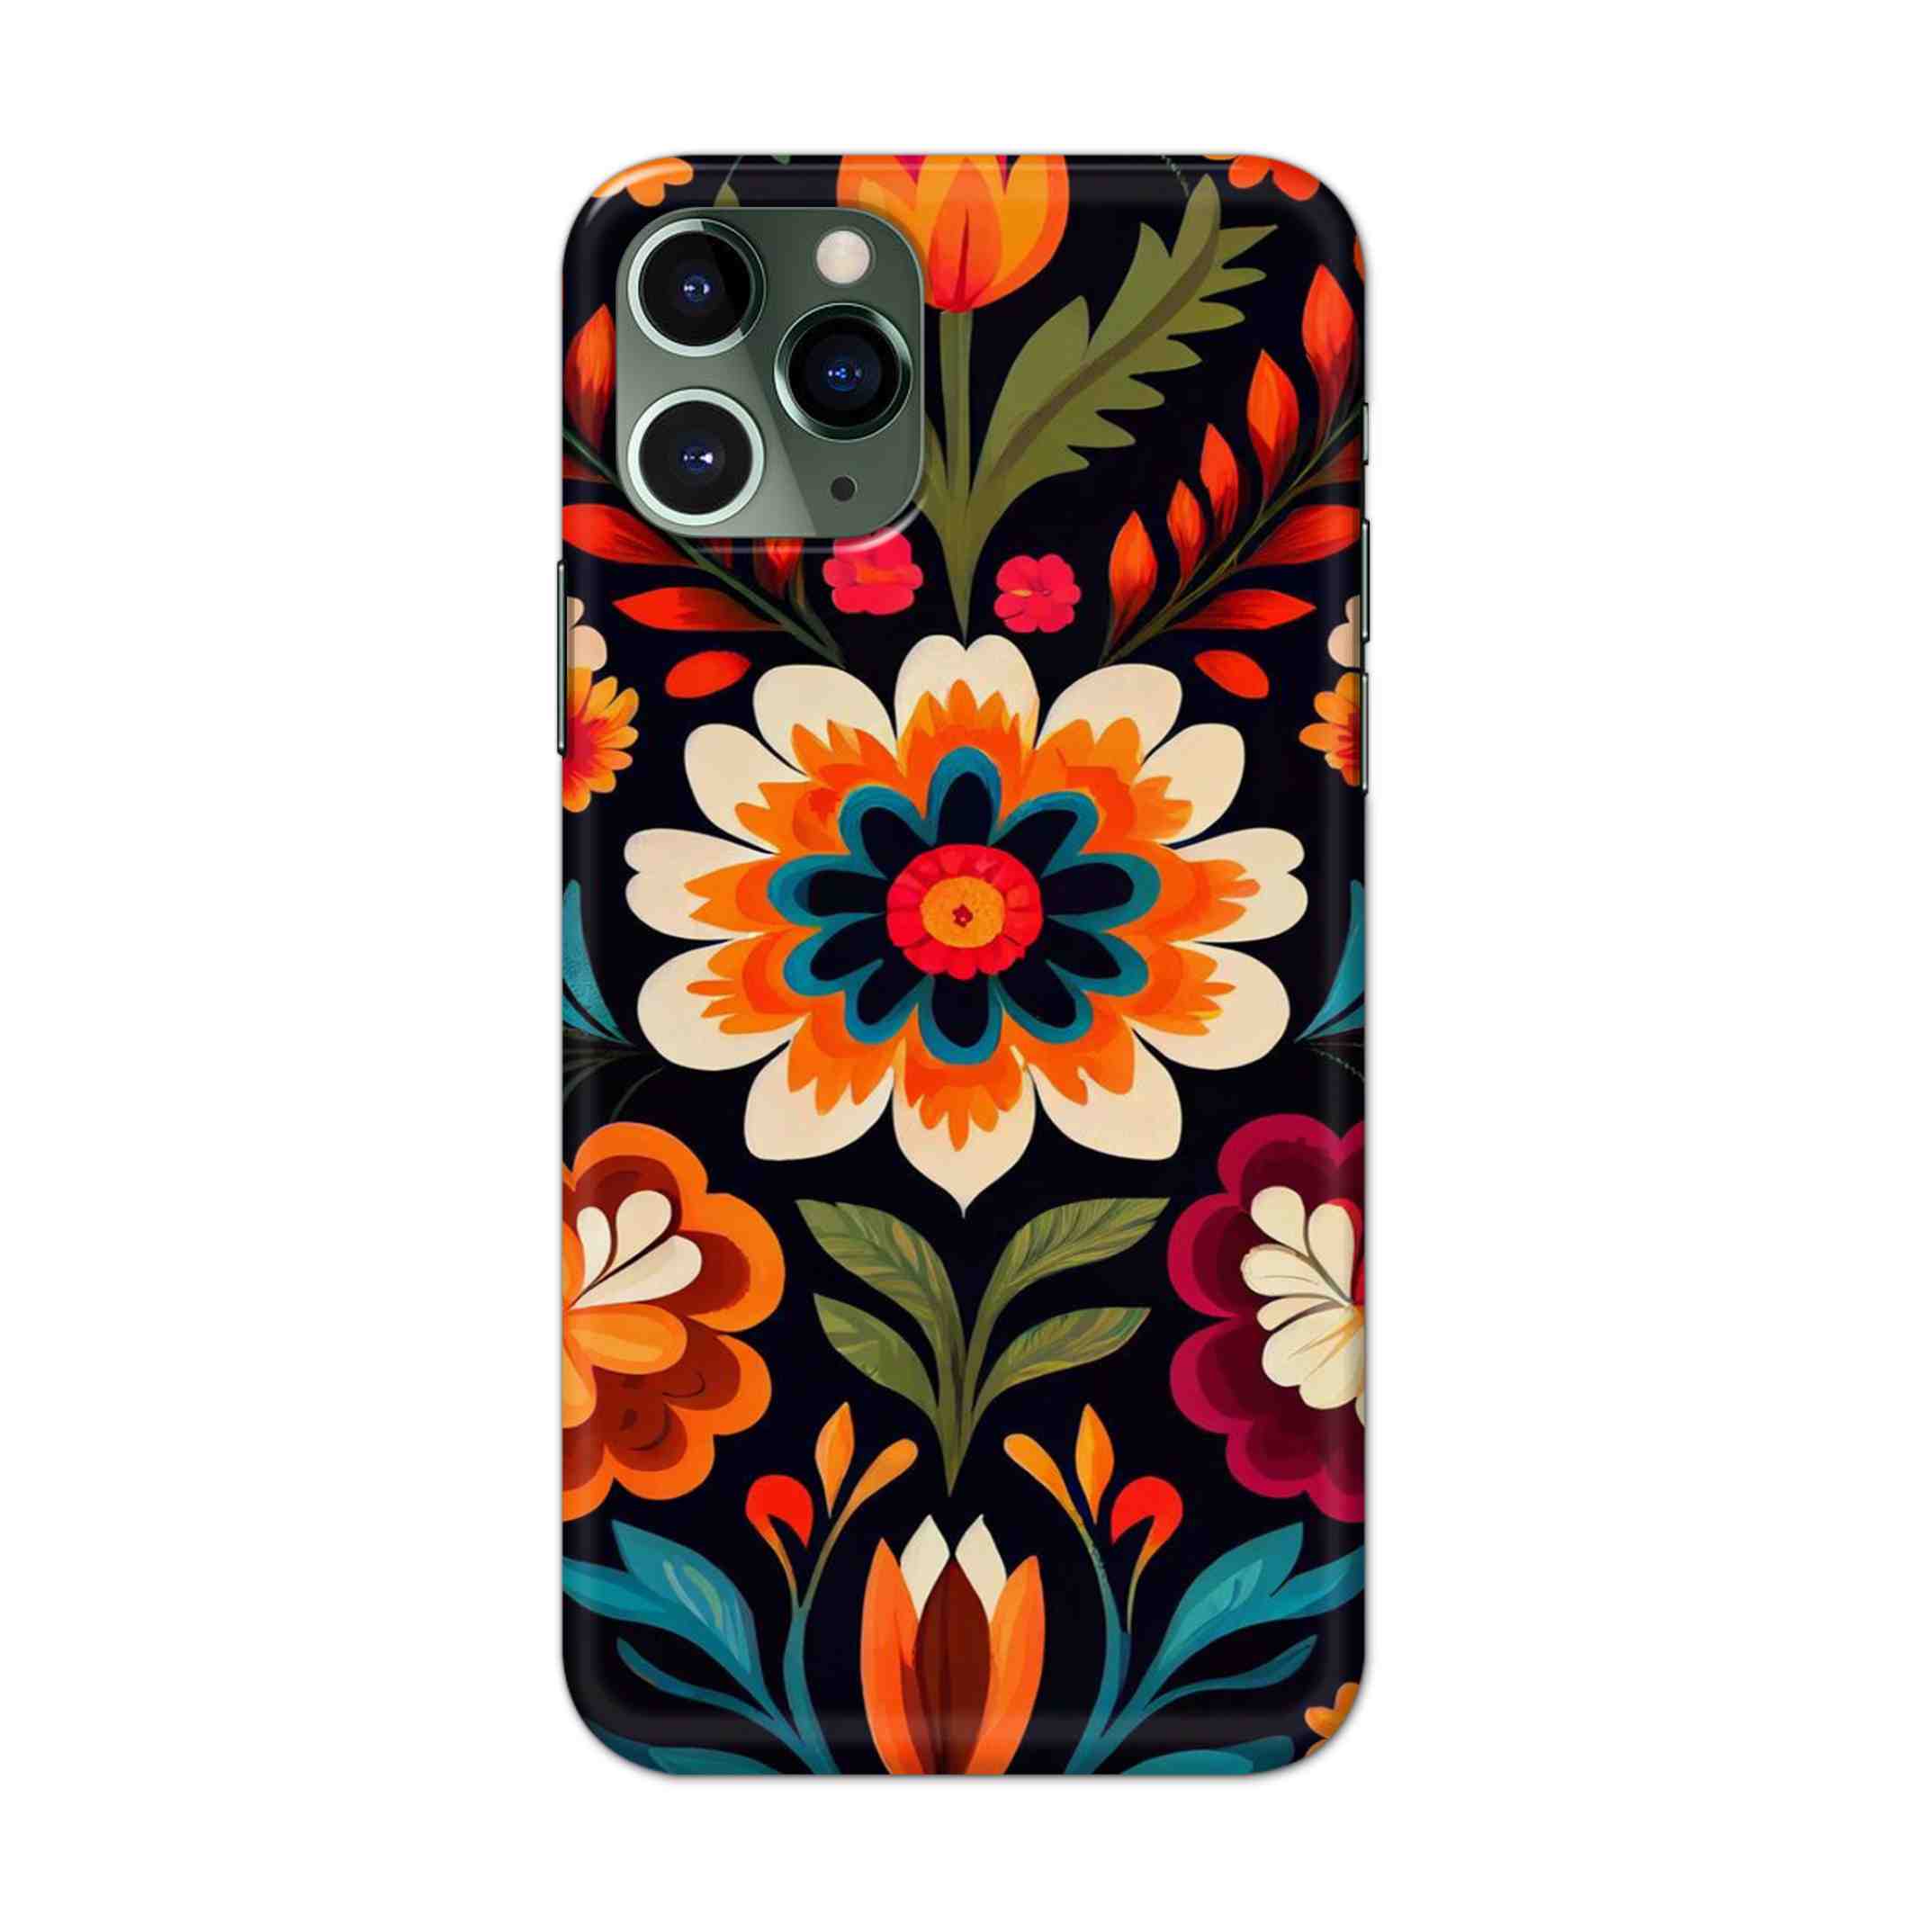 Buy Flower Hard Back Mobile Phone Case/Cover For iPhone 11 Pro Online